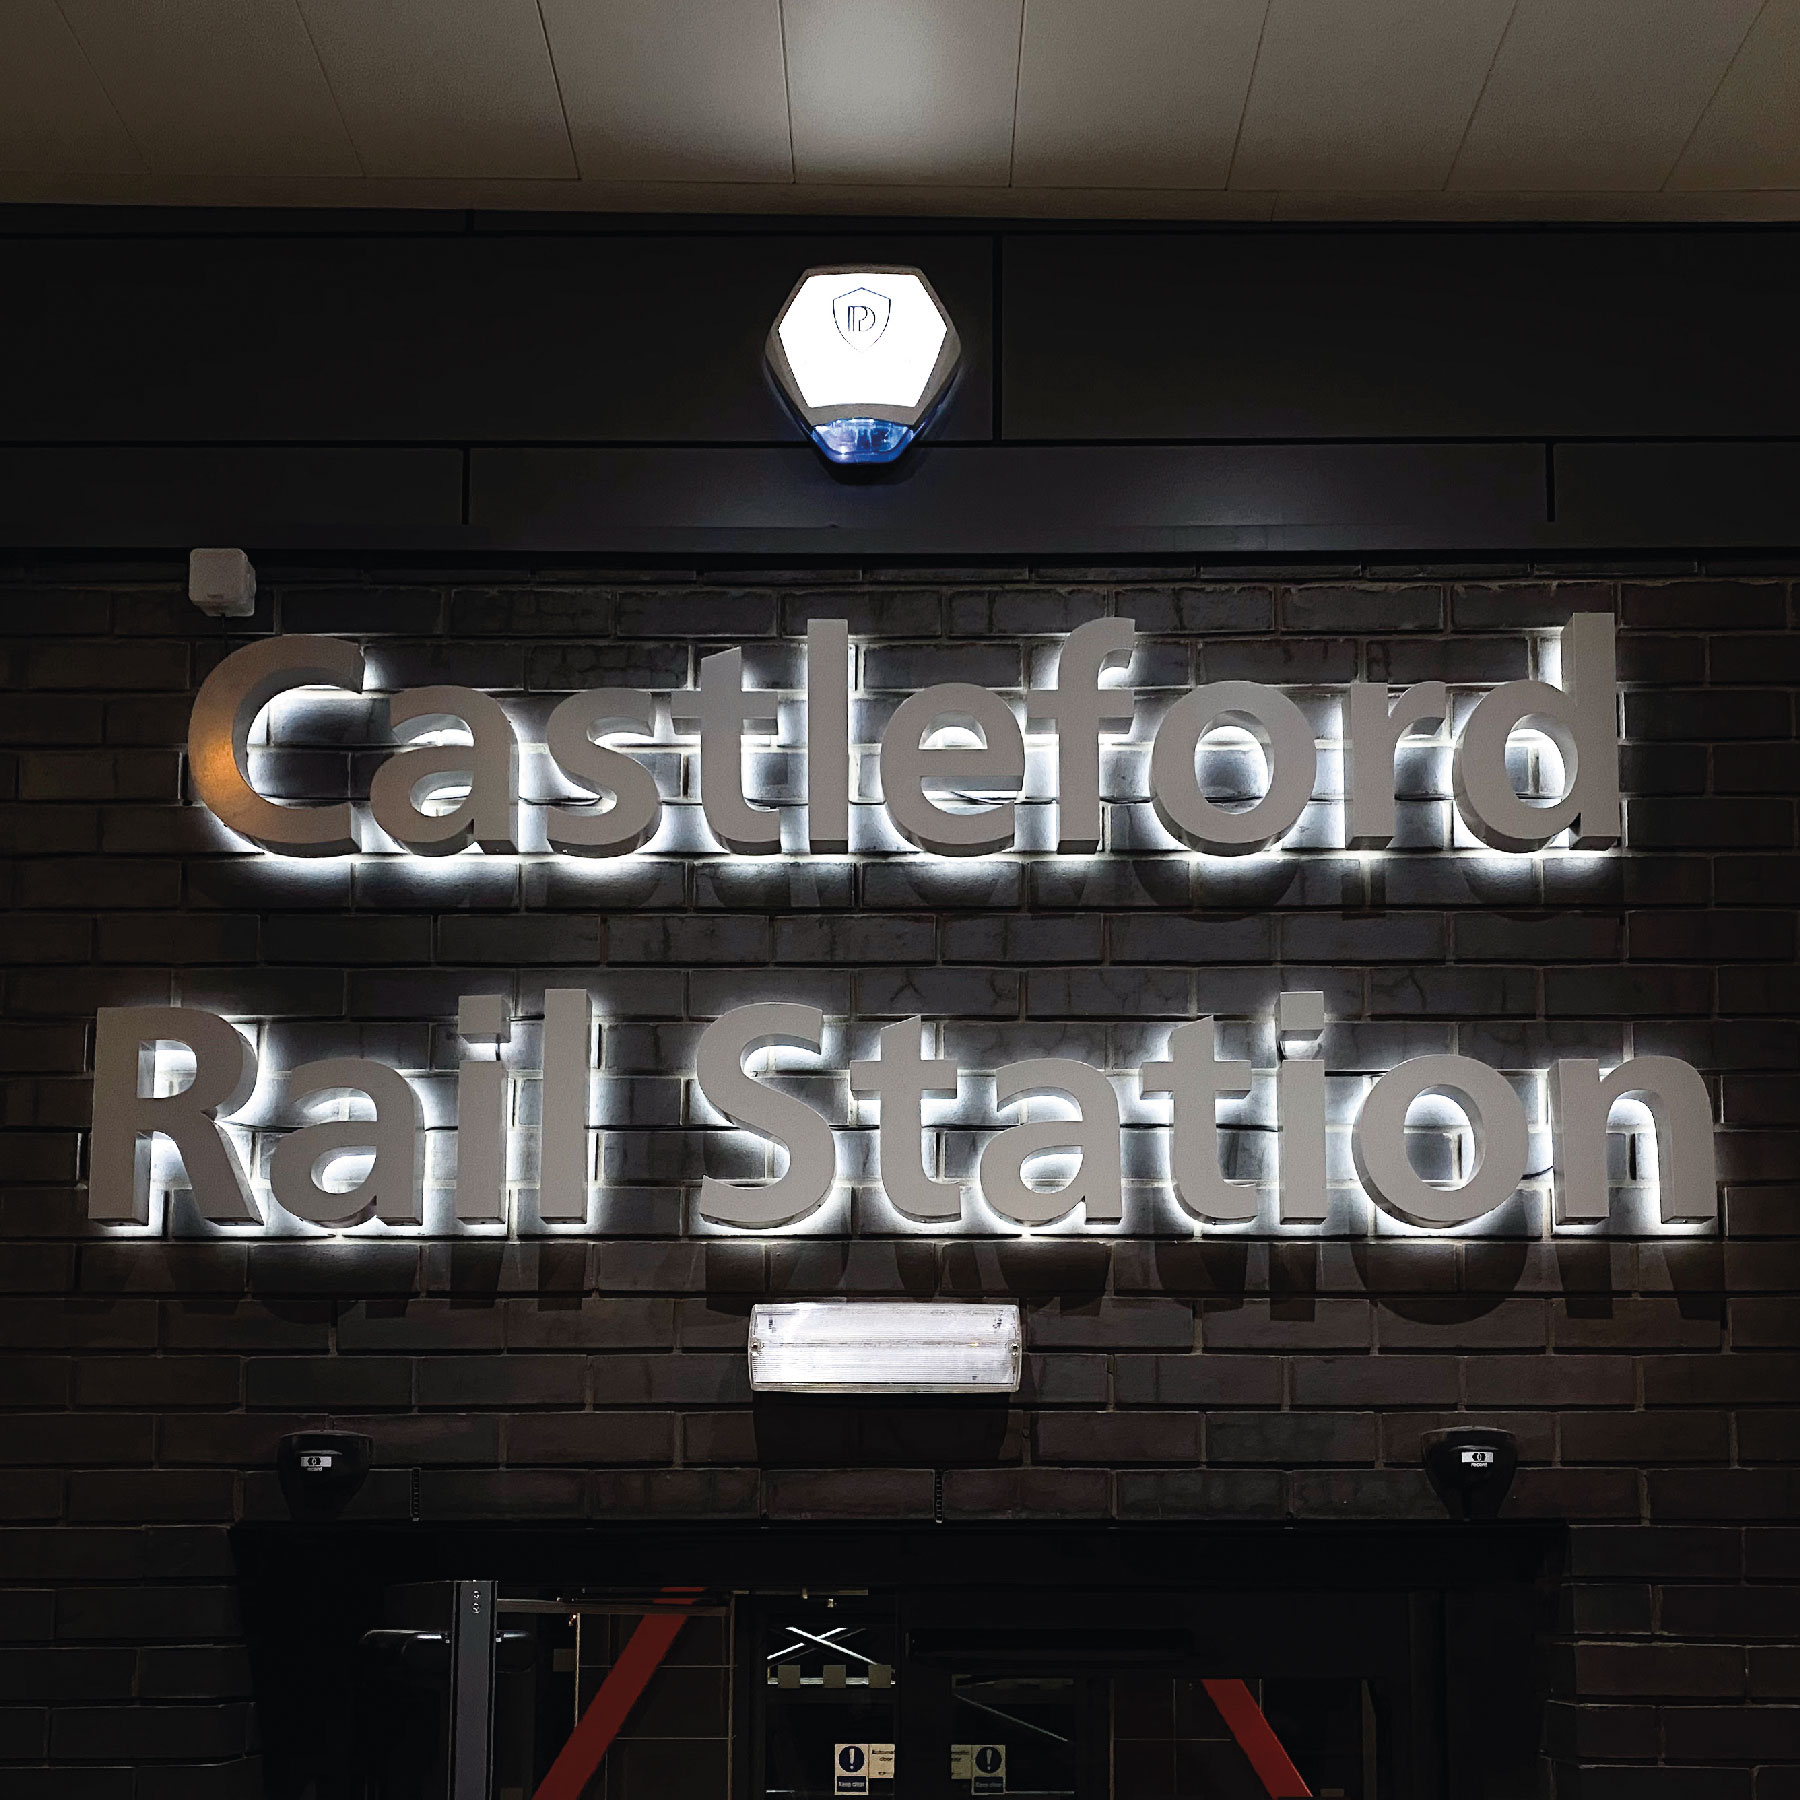 Castleford Rail Station in silver letters with backlighting.